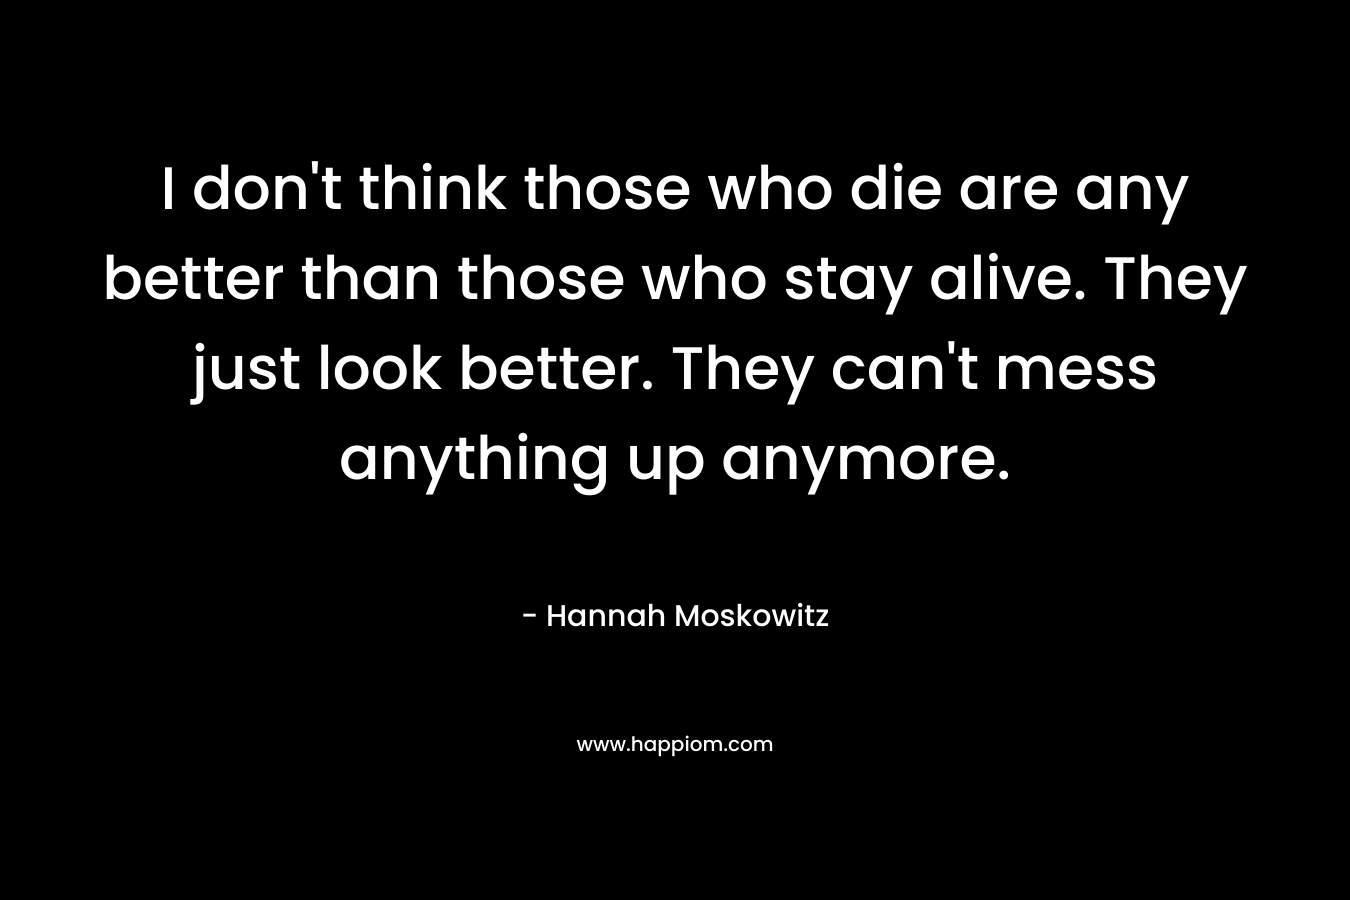 I don't think those who die are any better than those who stay alive. They just look better. They can't mess anything up anymore.